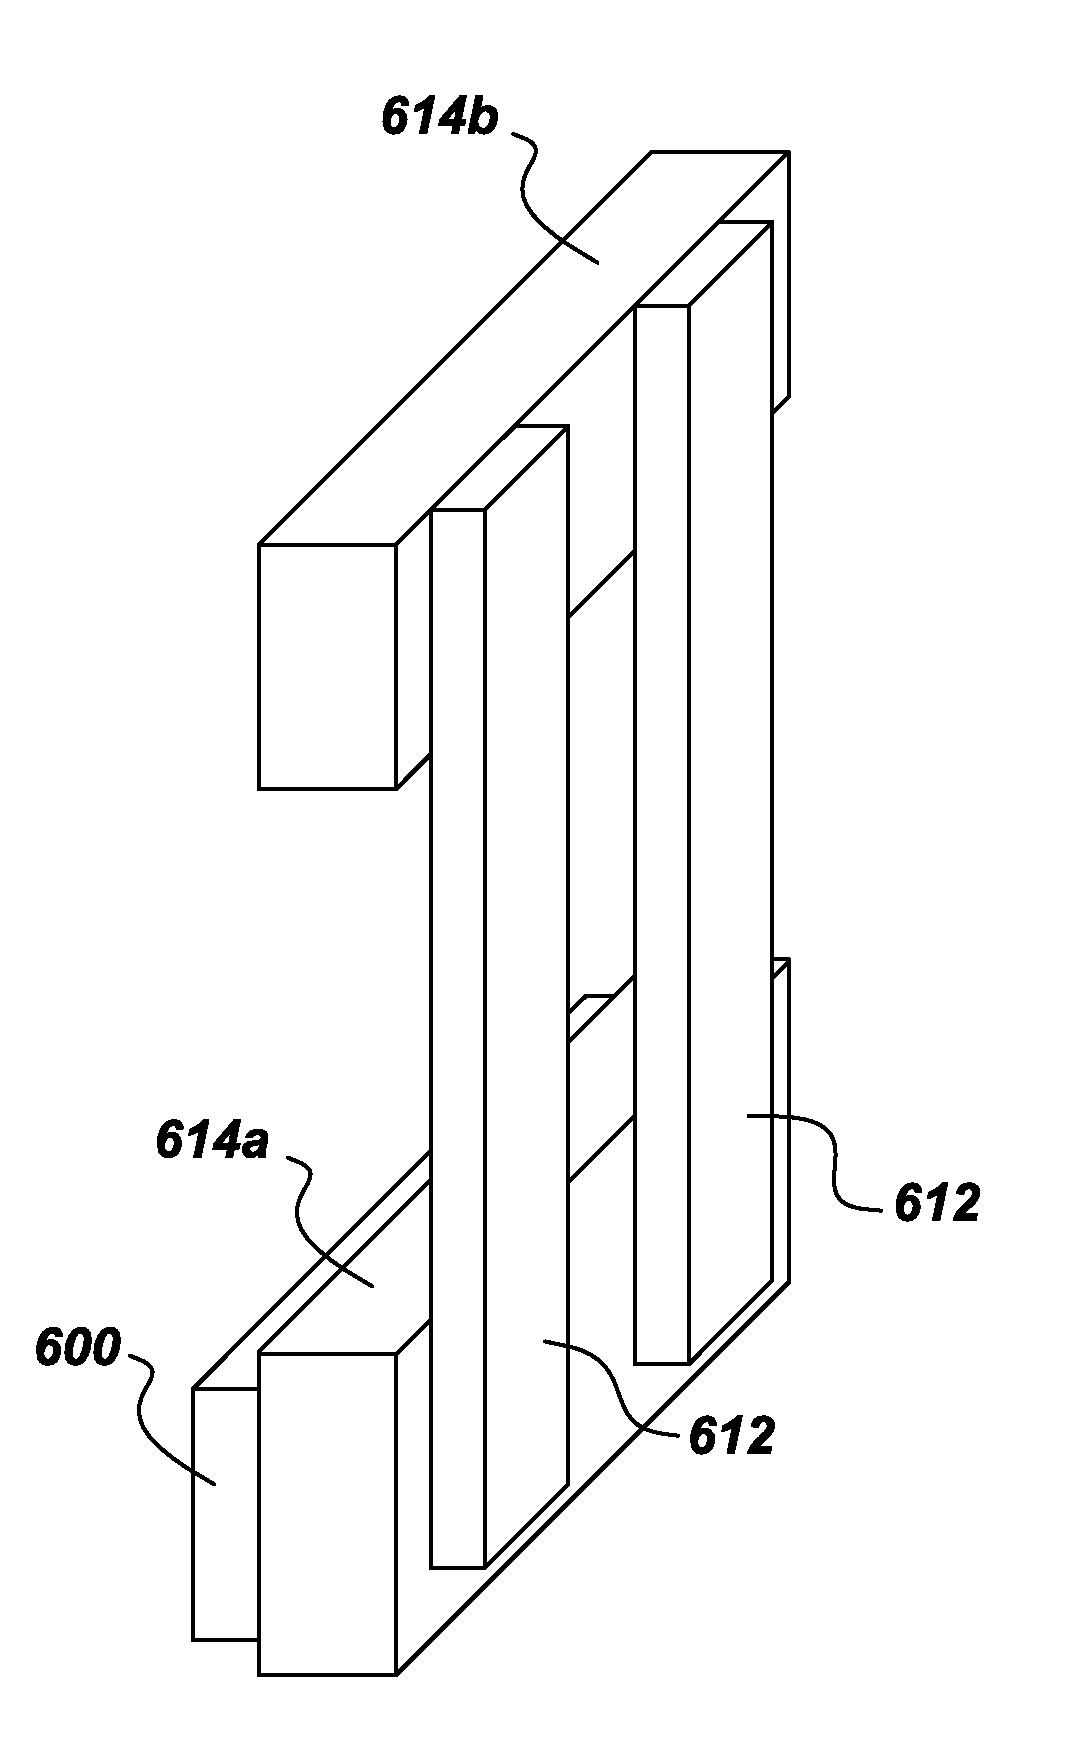 Thermal energy management component and system incorporating the same